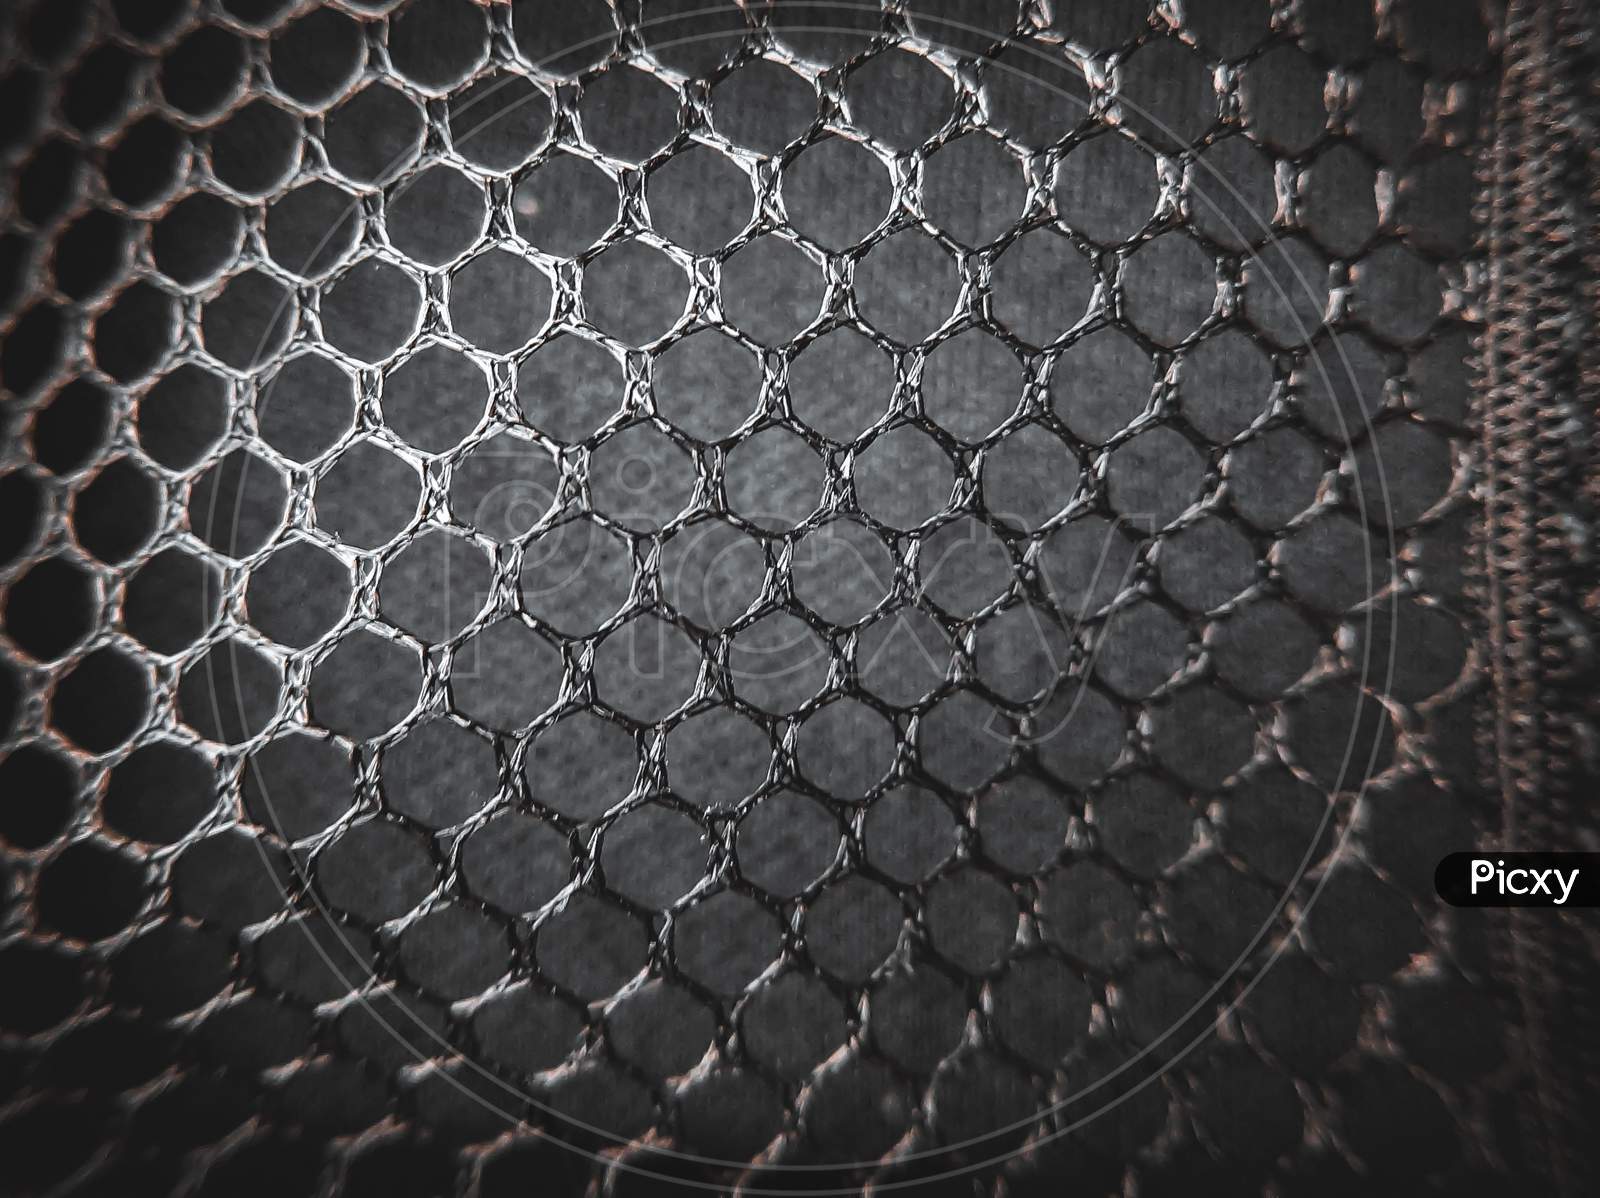 A photo of hexagonal shape net giving texture and surface to the image for creating a wallpaper.